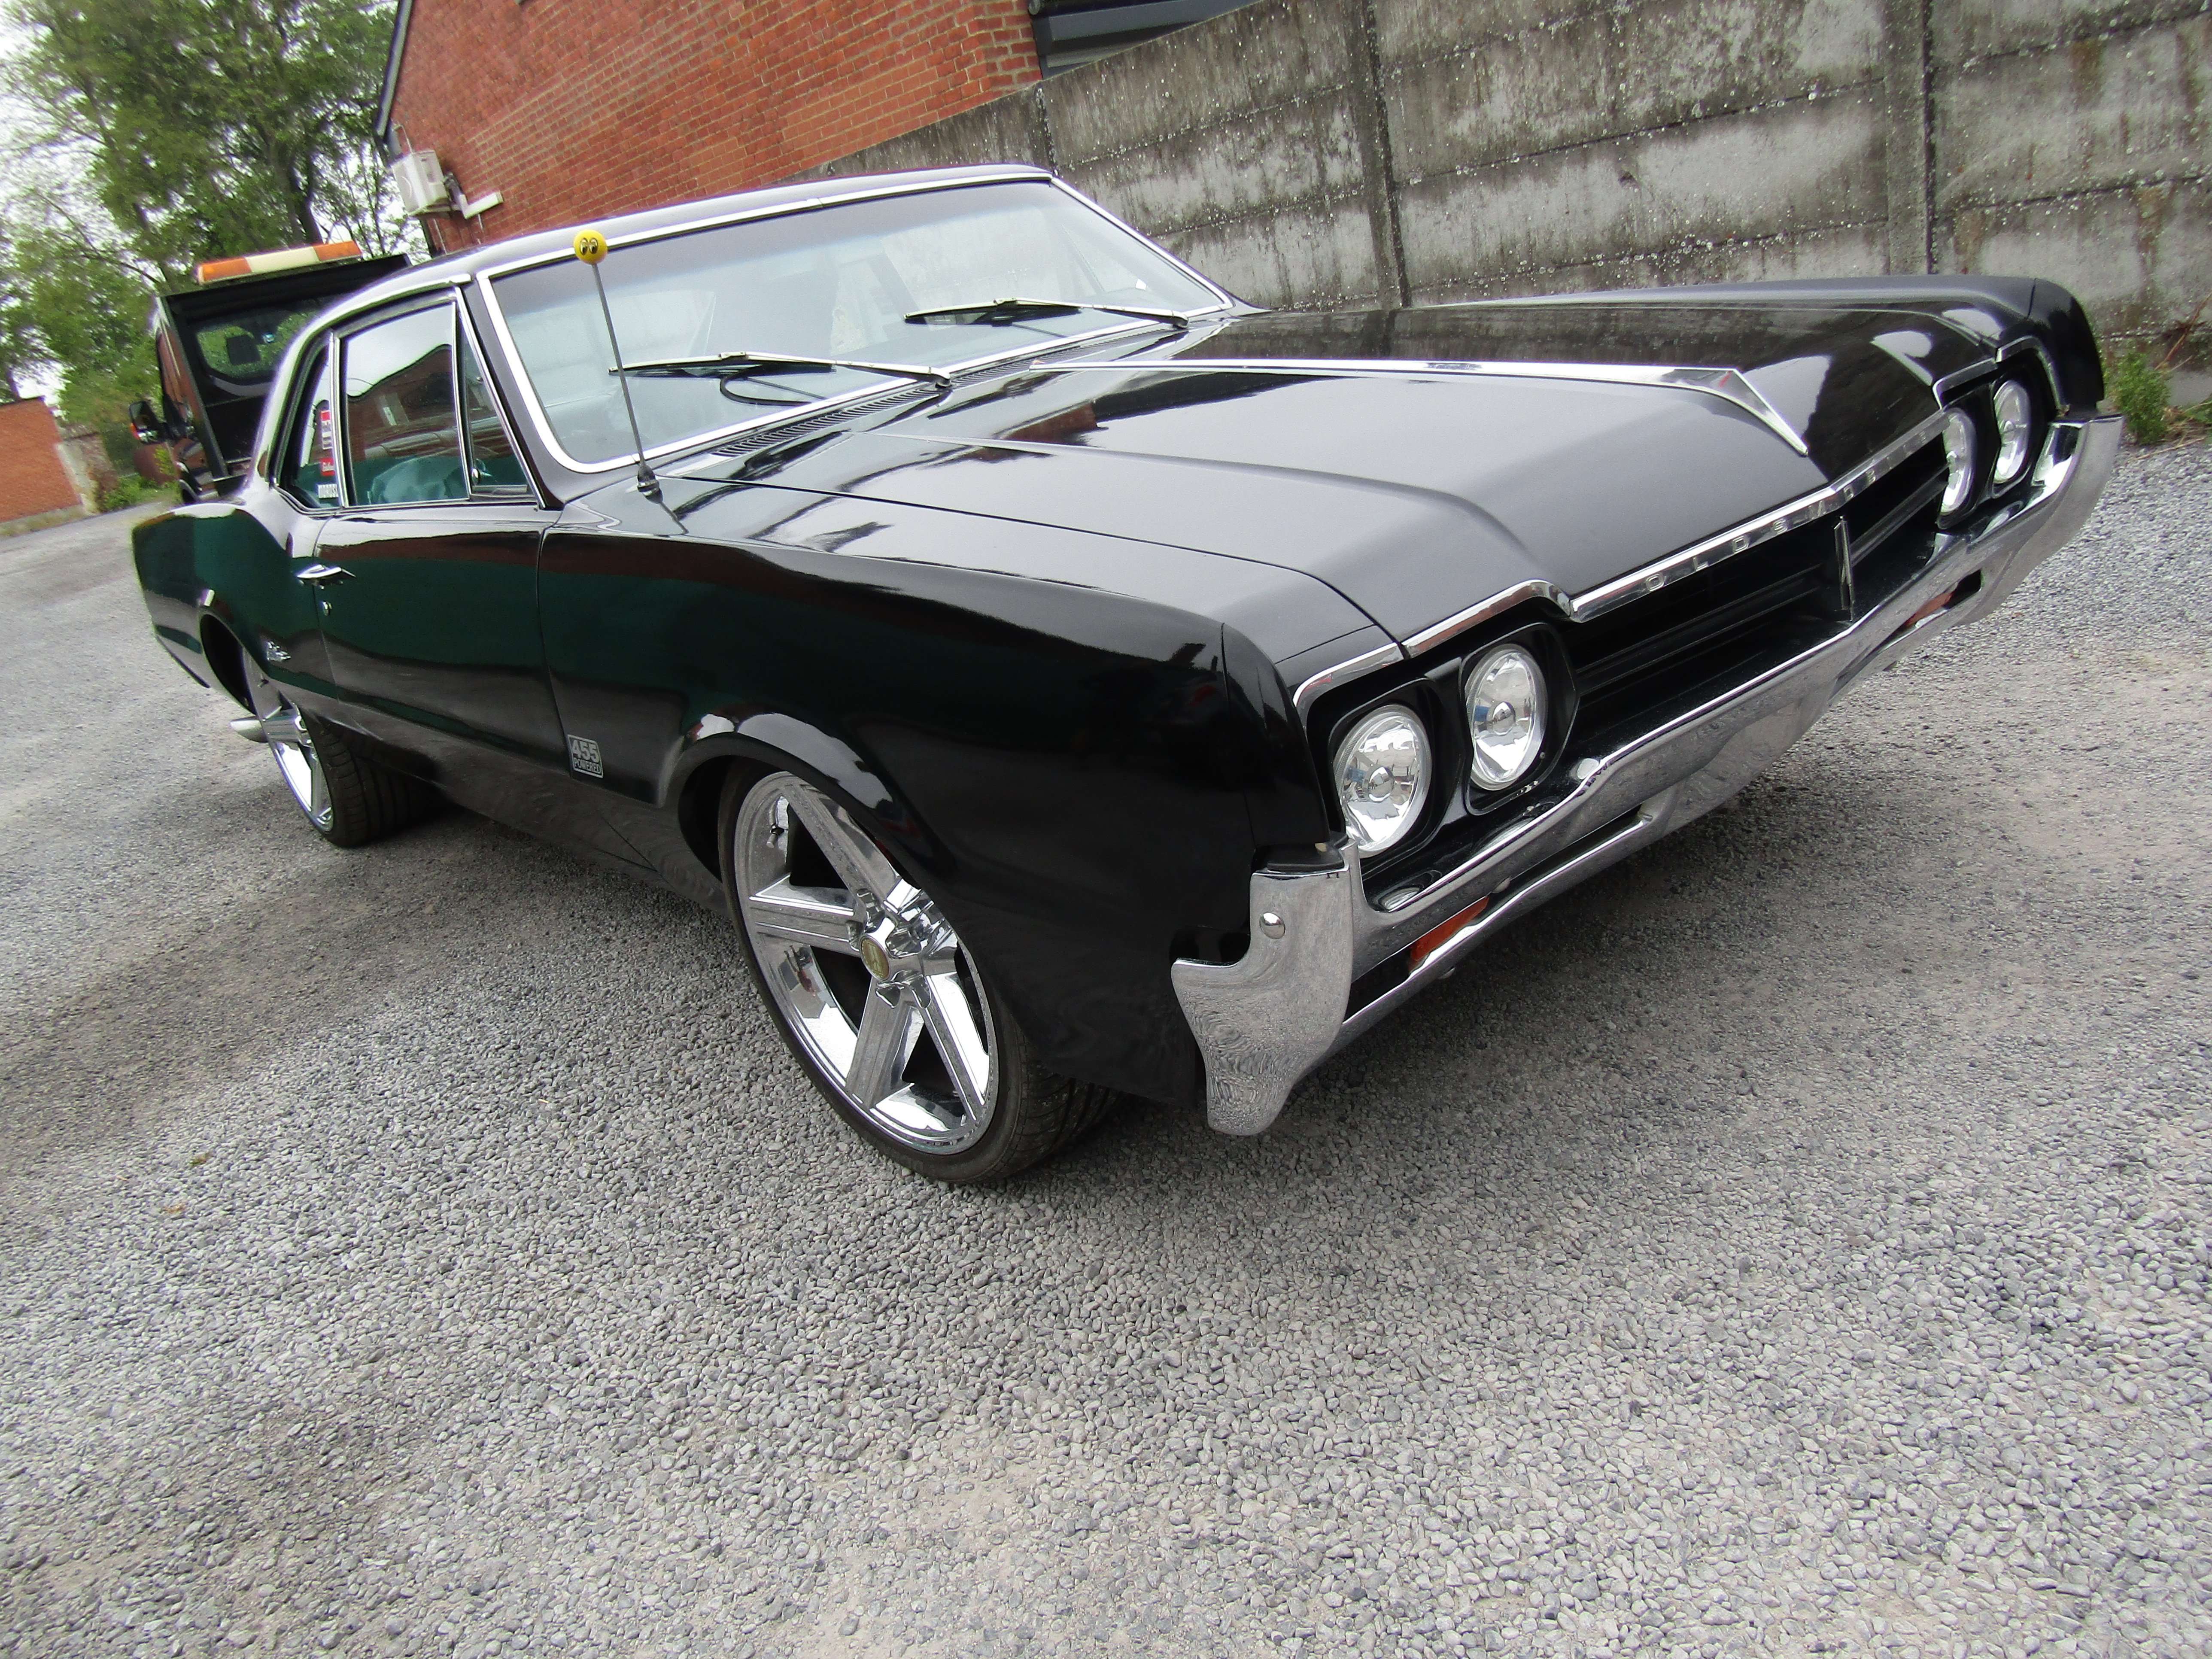 Oldsmobile Cutlass Coupe in Black used in Ghlin (Mons) for € 29,500.-